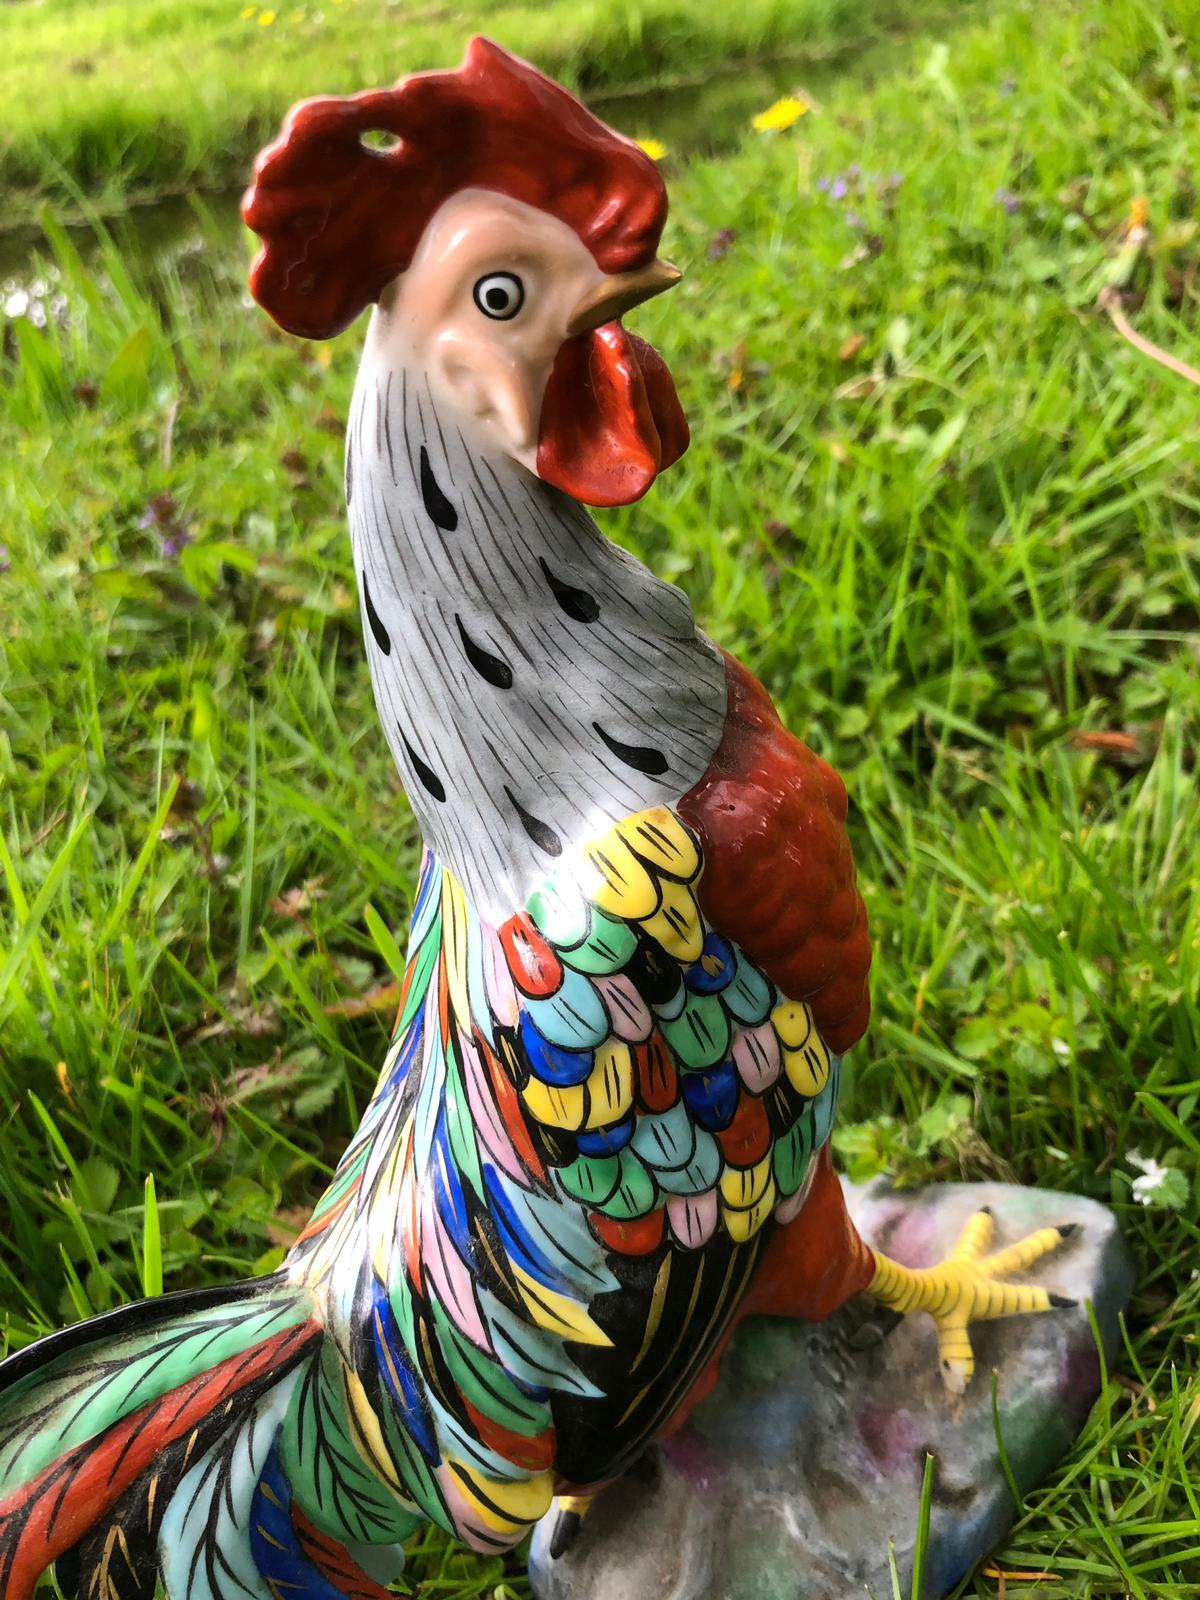 Porcelain colorful rooster by Chelsea House marked with the gold anchor. Manufactured in England, the rooster is perched on a branch and features tones of red, grey, yellow, blue, green and black. The rock is the stone on which the rooster is